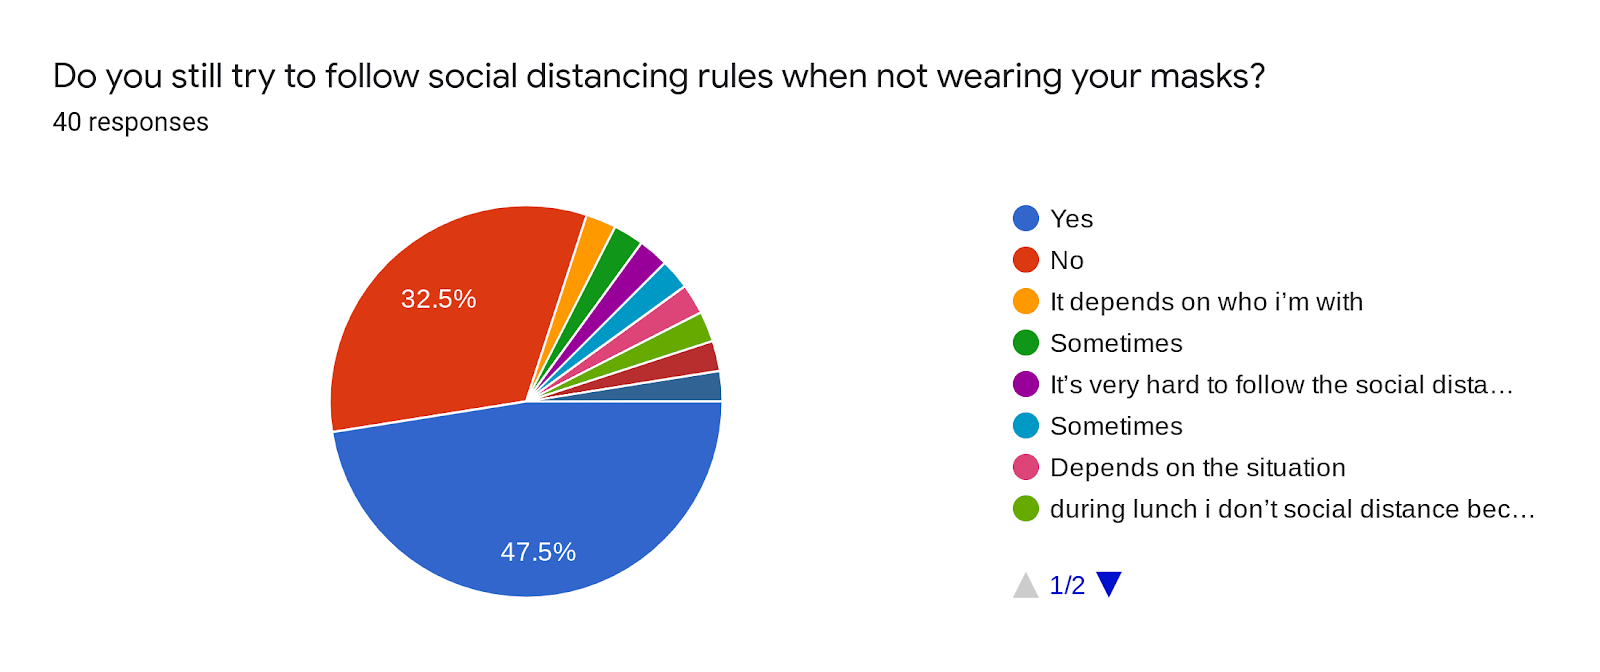 Forms response chart. Question title: Do you still try to follow social distancing rules when not wearing your masks?. Number of responses: 40 responses.